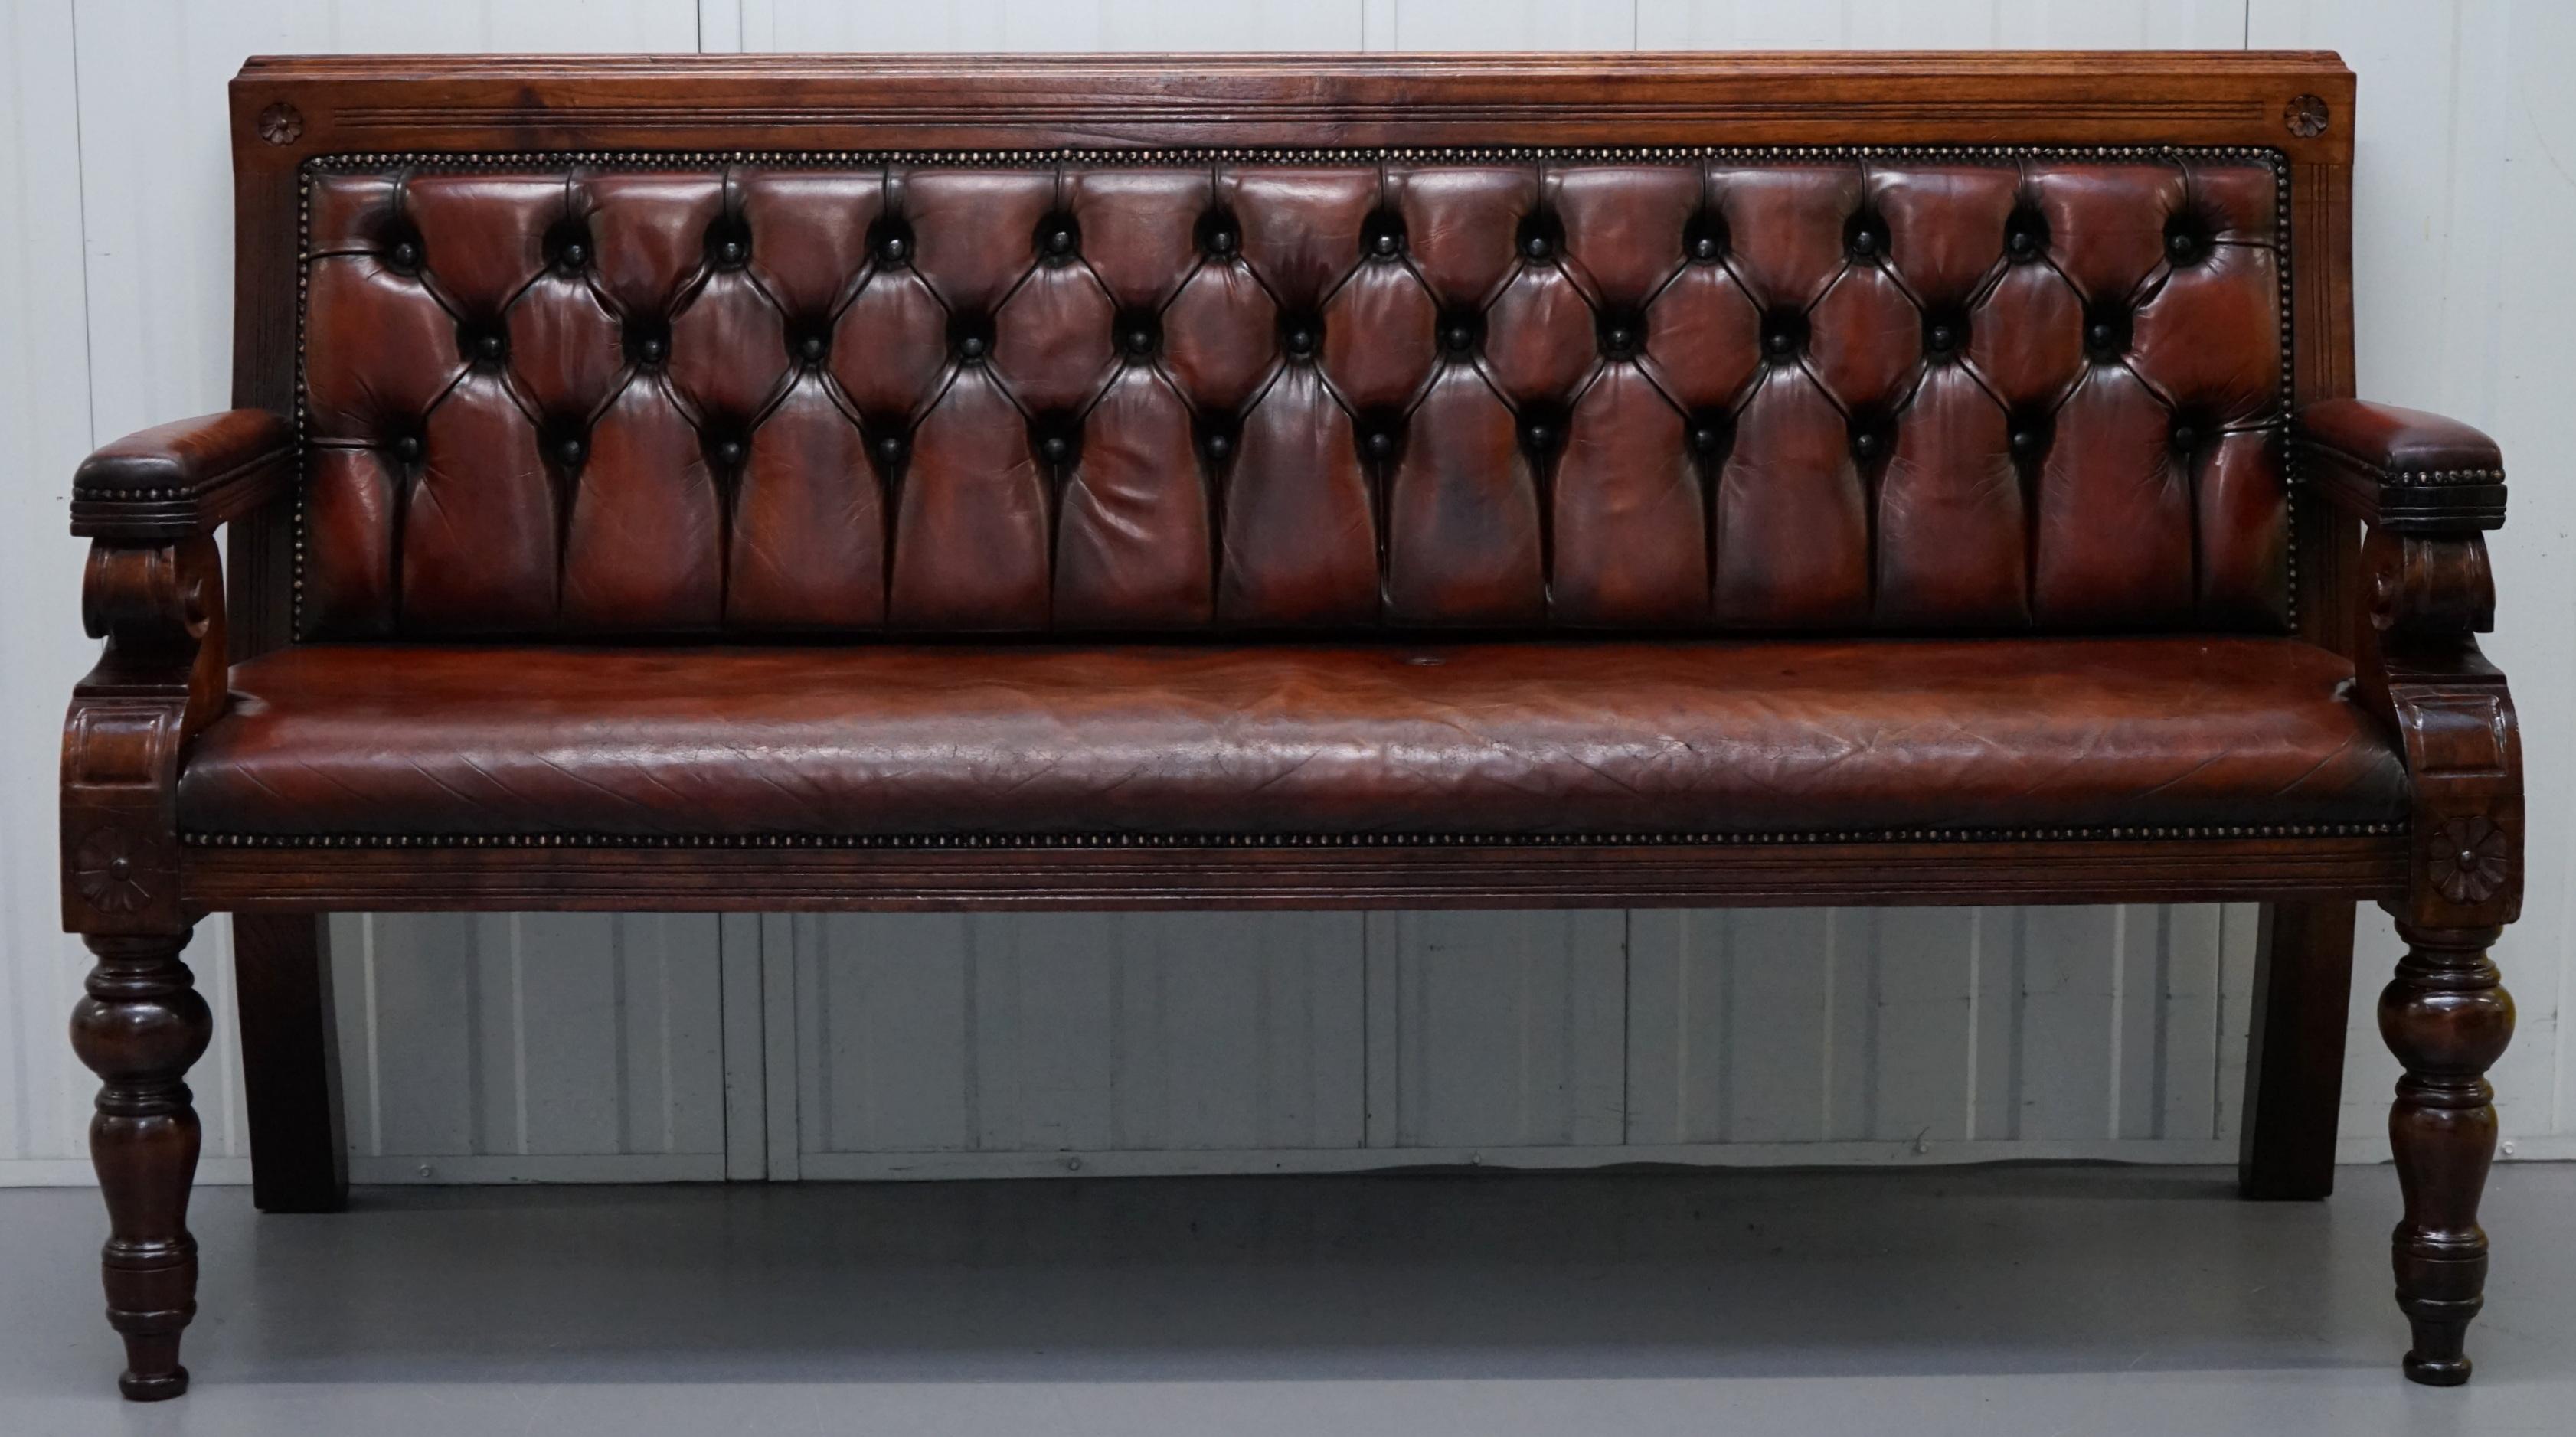 We are delighted to this stunning large fully restored hand dyed cigar brown leather Chesterfield bench

This bench is part of a suite, I have this one, another the same but smaller and another that same smaller size without buttons

This is a